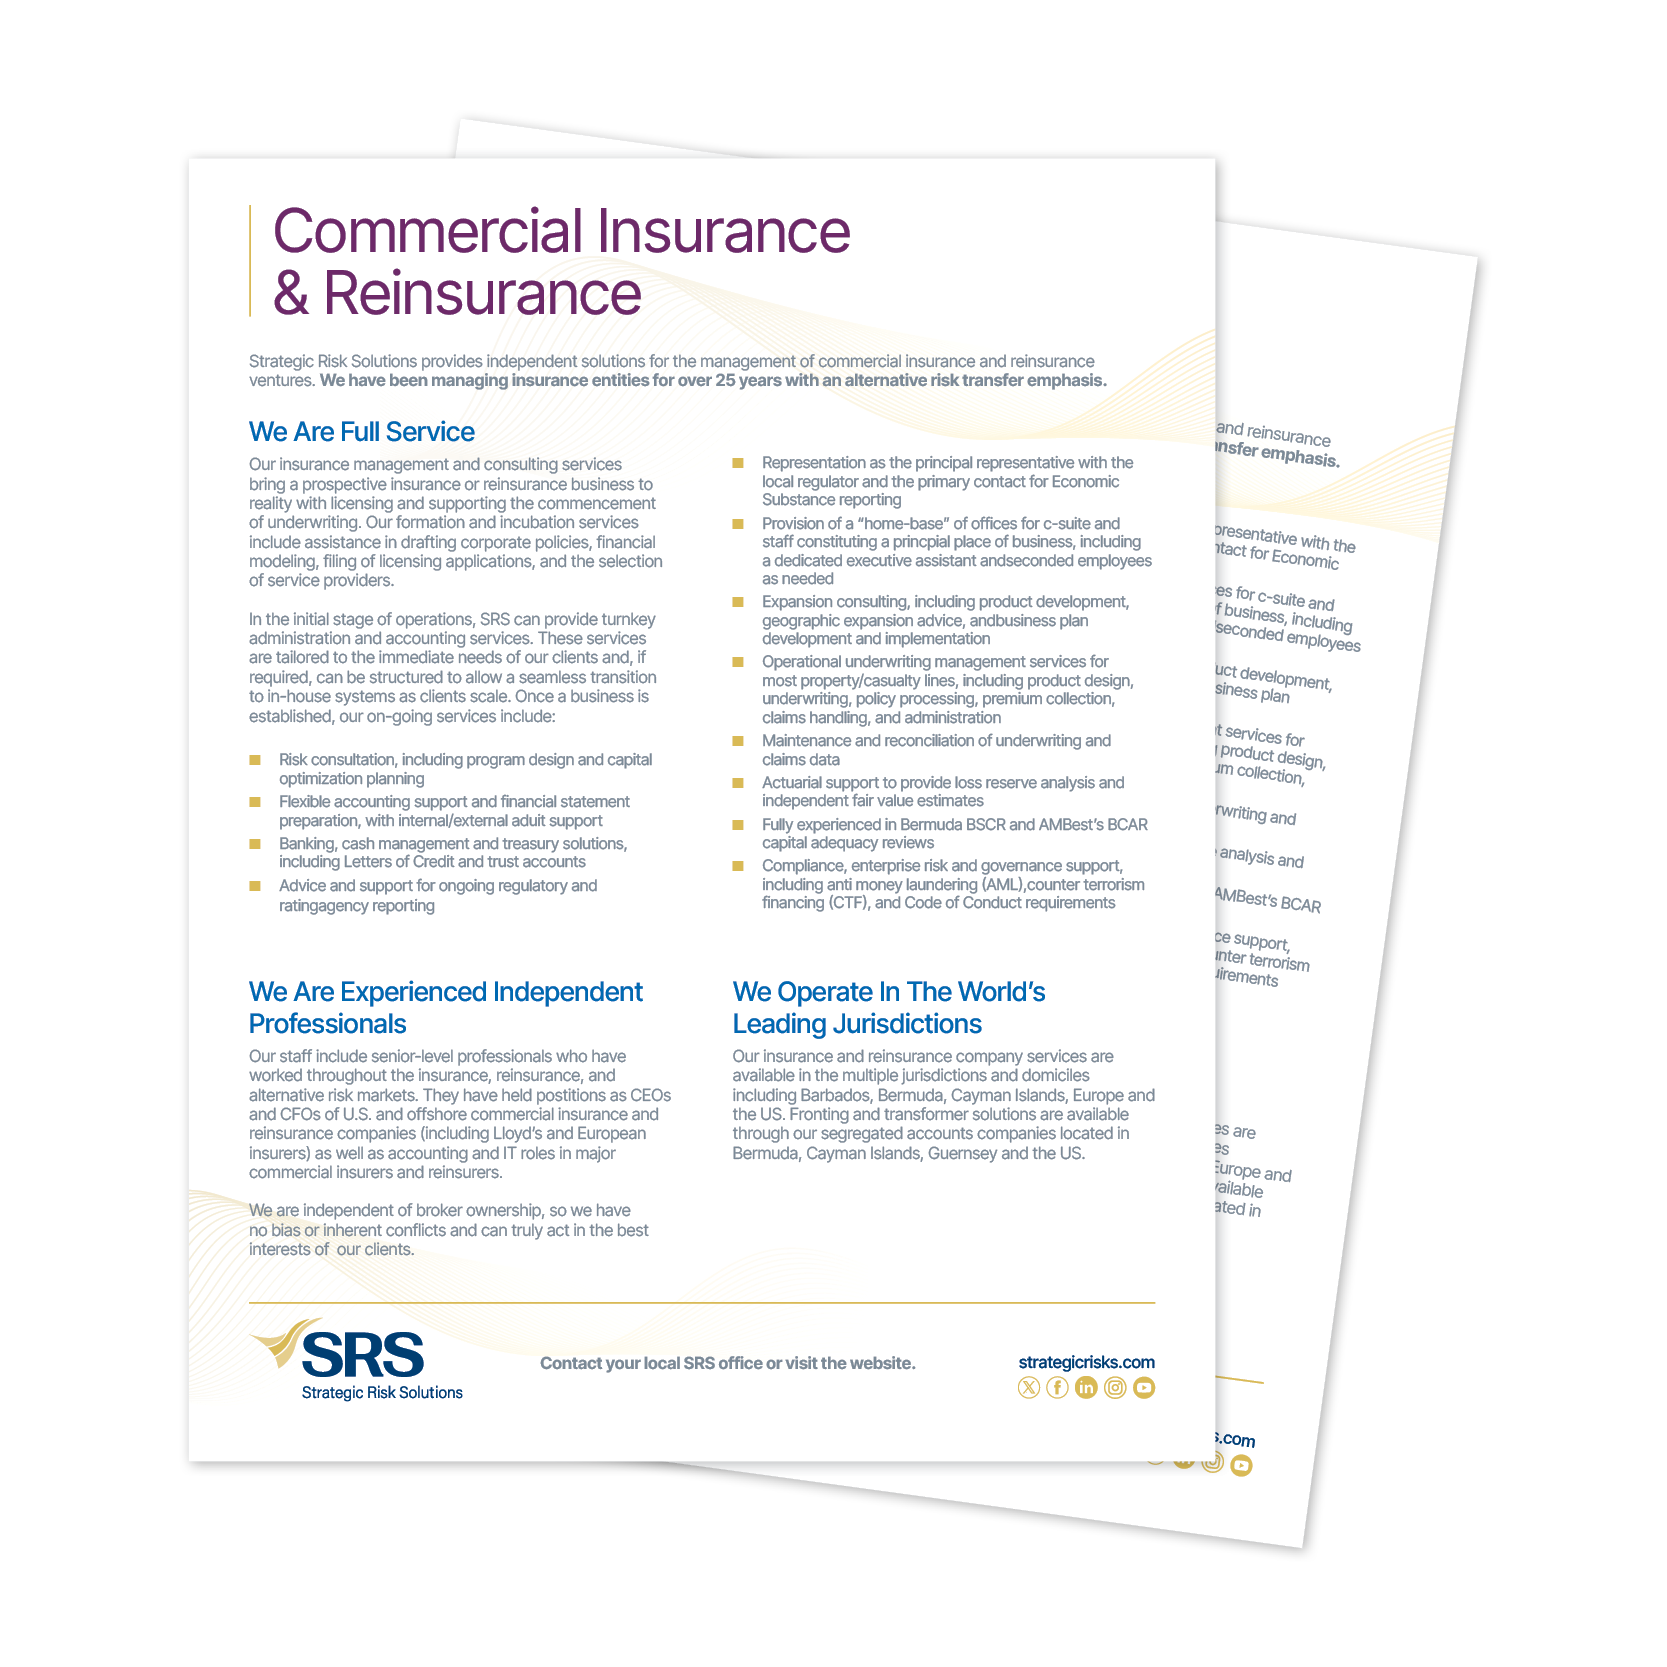 SRS-Commercial Reinsurance Download Graphic